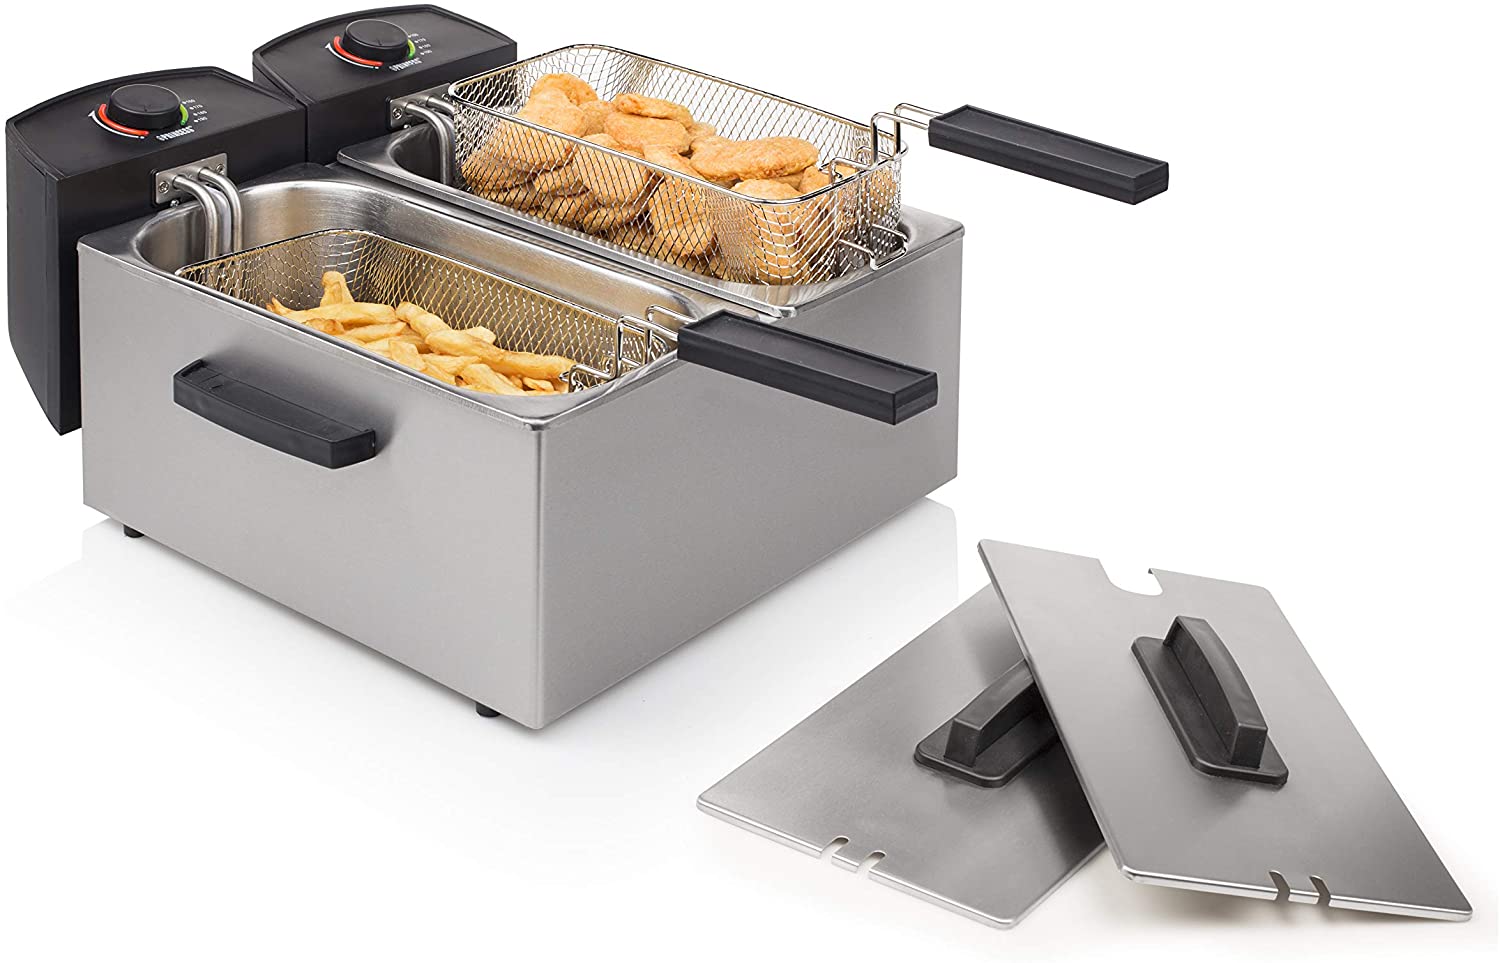 Princess Stainless Steel Double Fryer, 2 x 3 Litres (2 x 1800 Watt) with Cold Zone Function, 183123